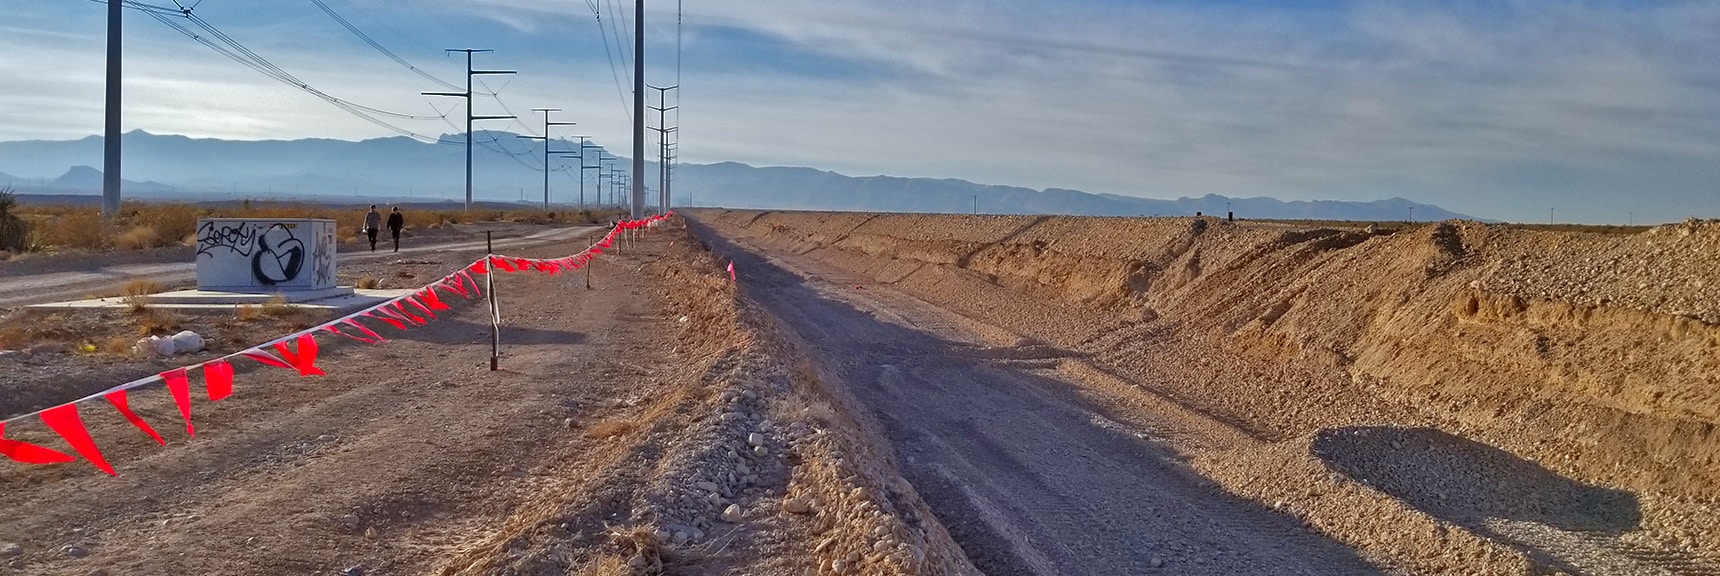 Moccasin Looking West Toward Hwy 95 and Mt. Charleston Wilderness. | Snapshot of Las Vegas Northern Growth Edge on January 3, 2021